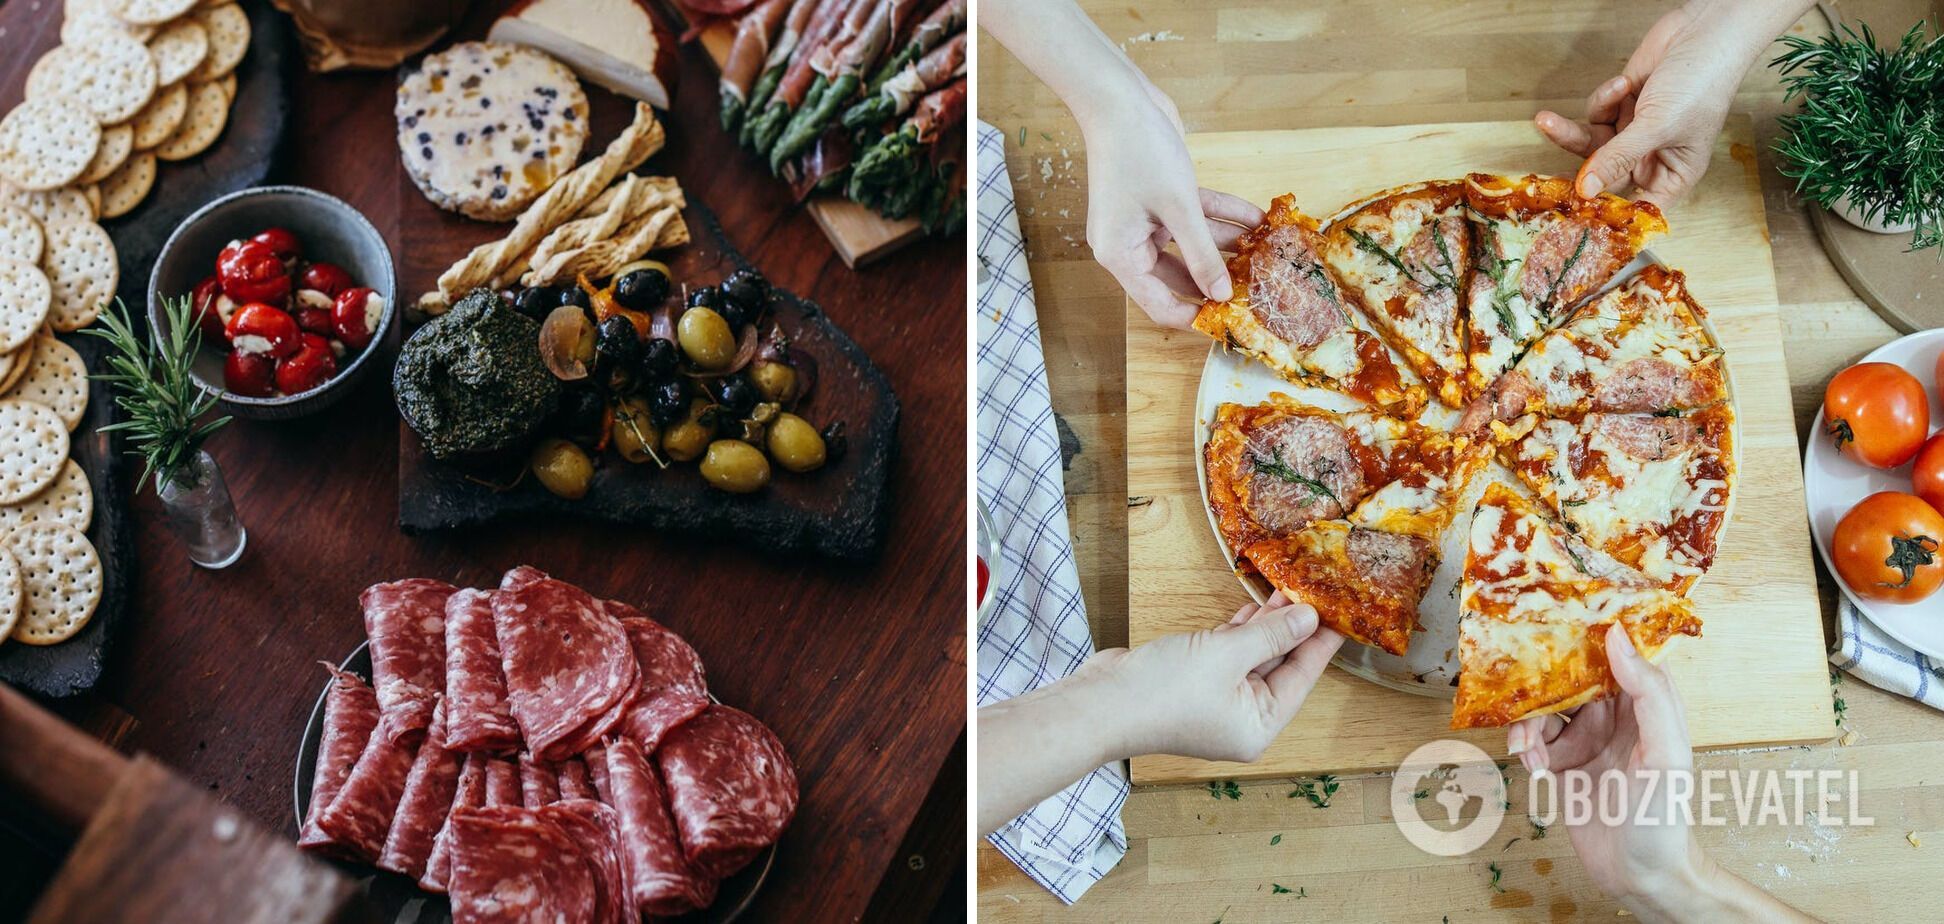 Pizza toppings